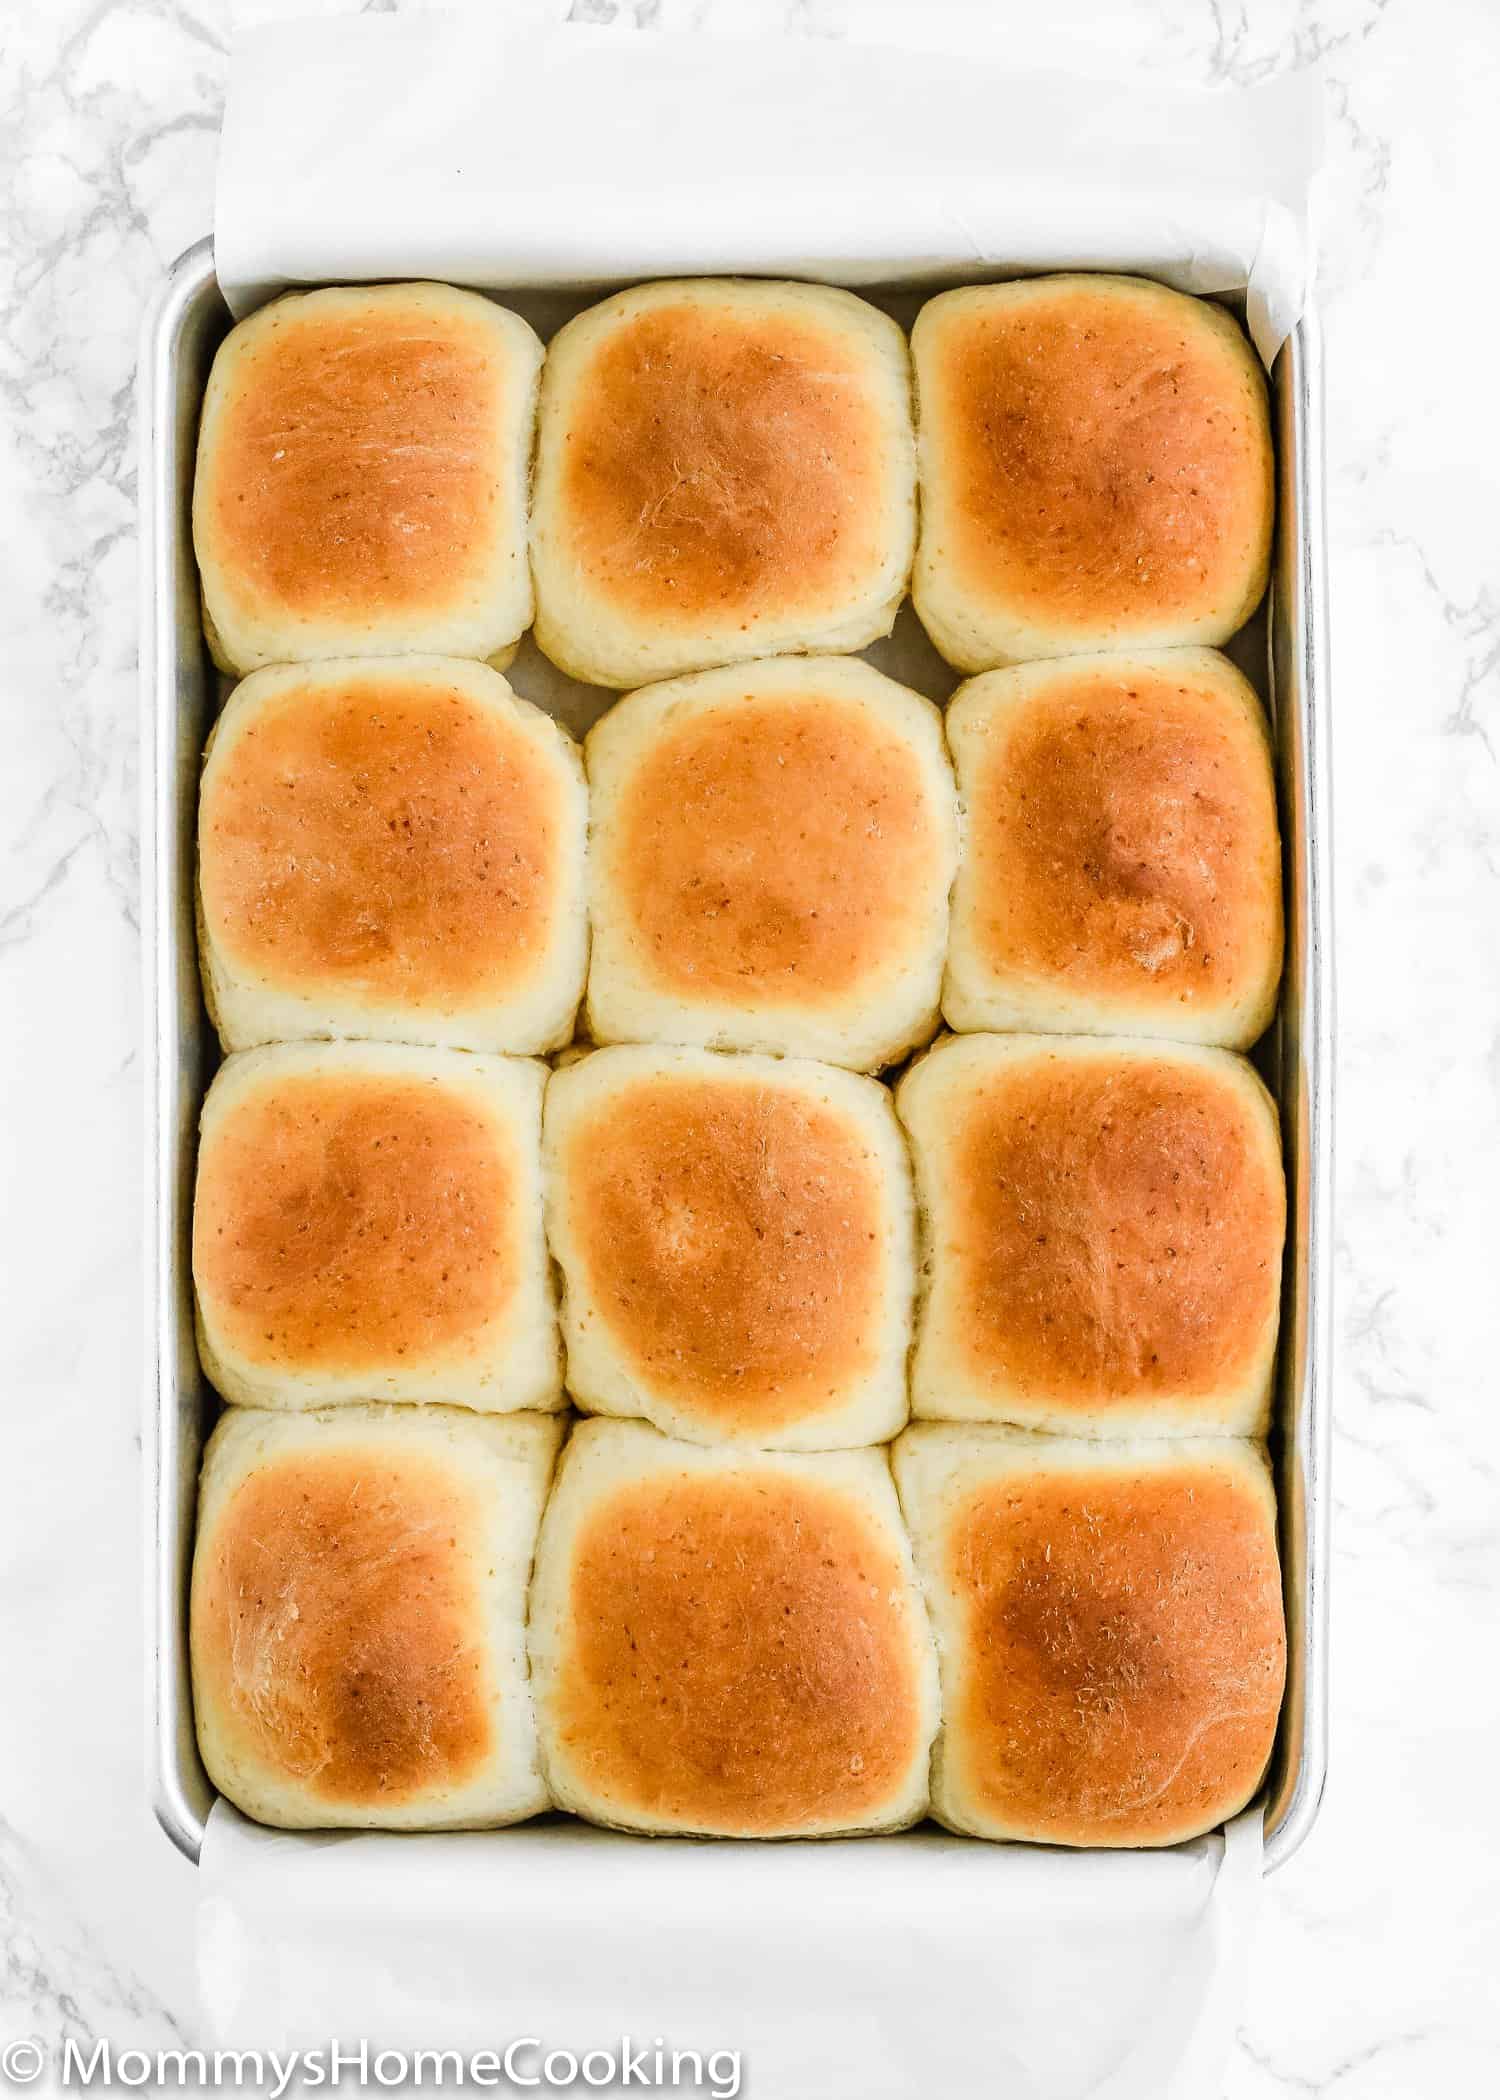 A pan of freshly baked dinner rolls made without egg.